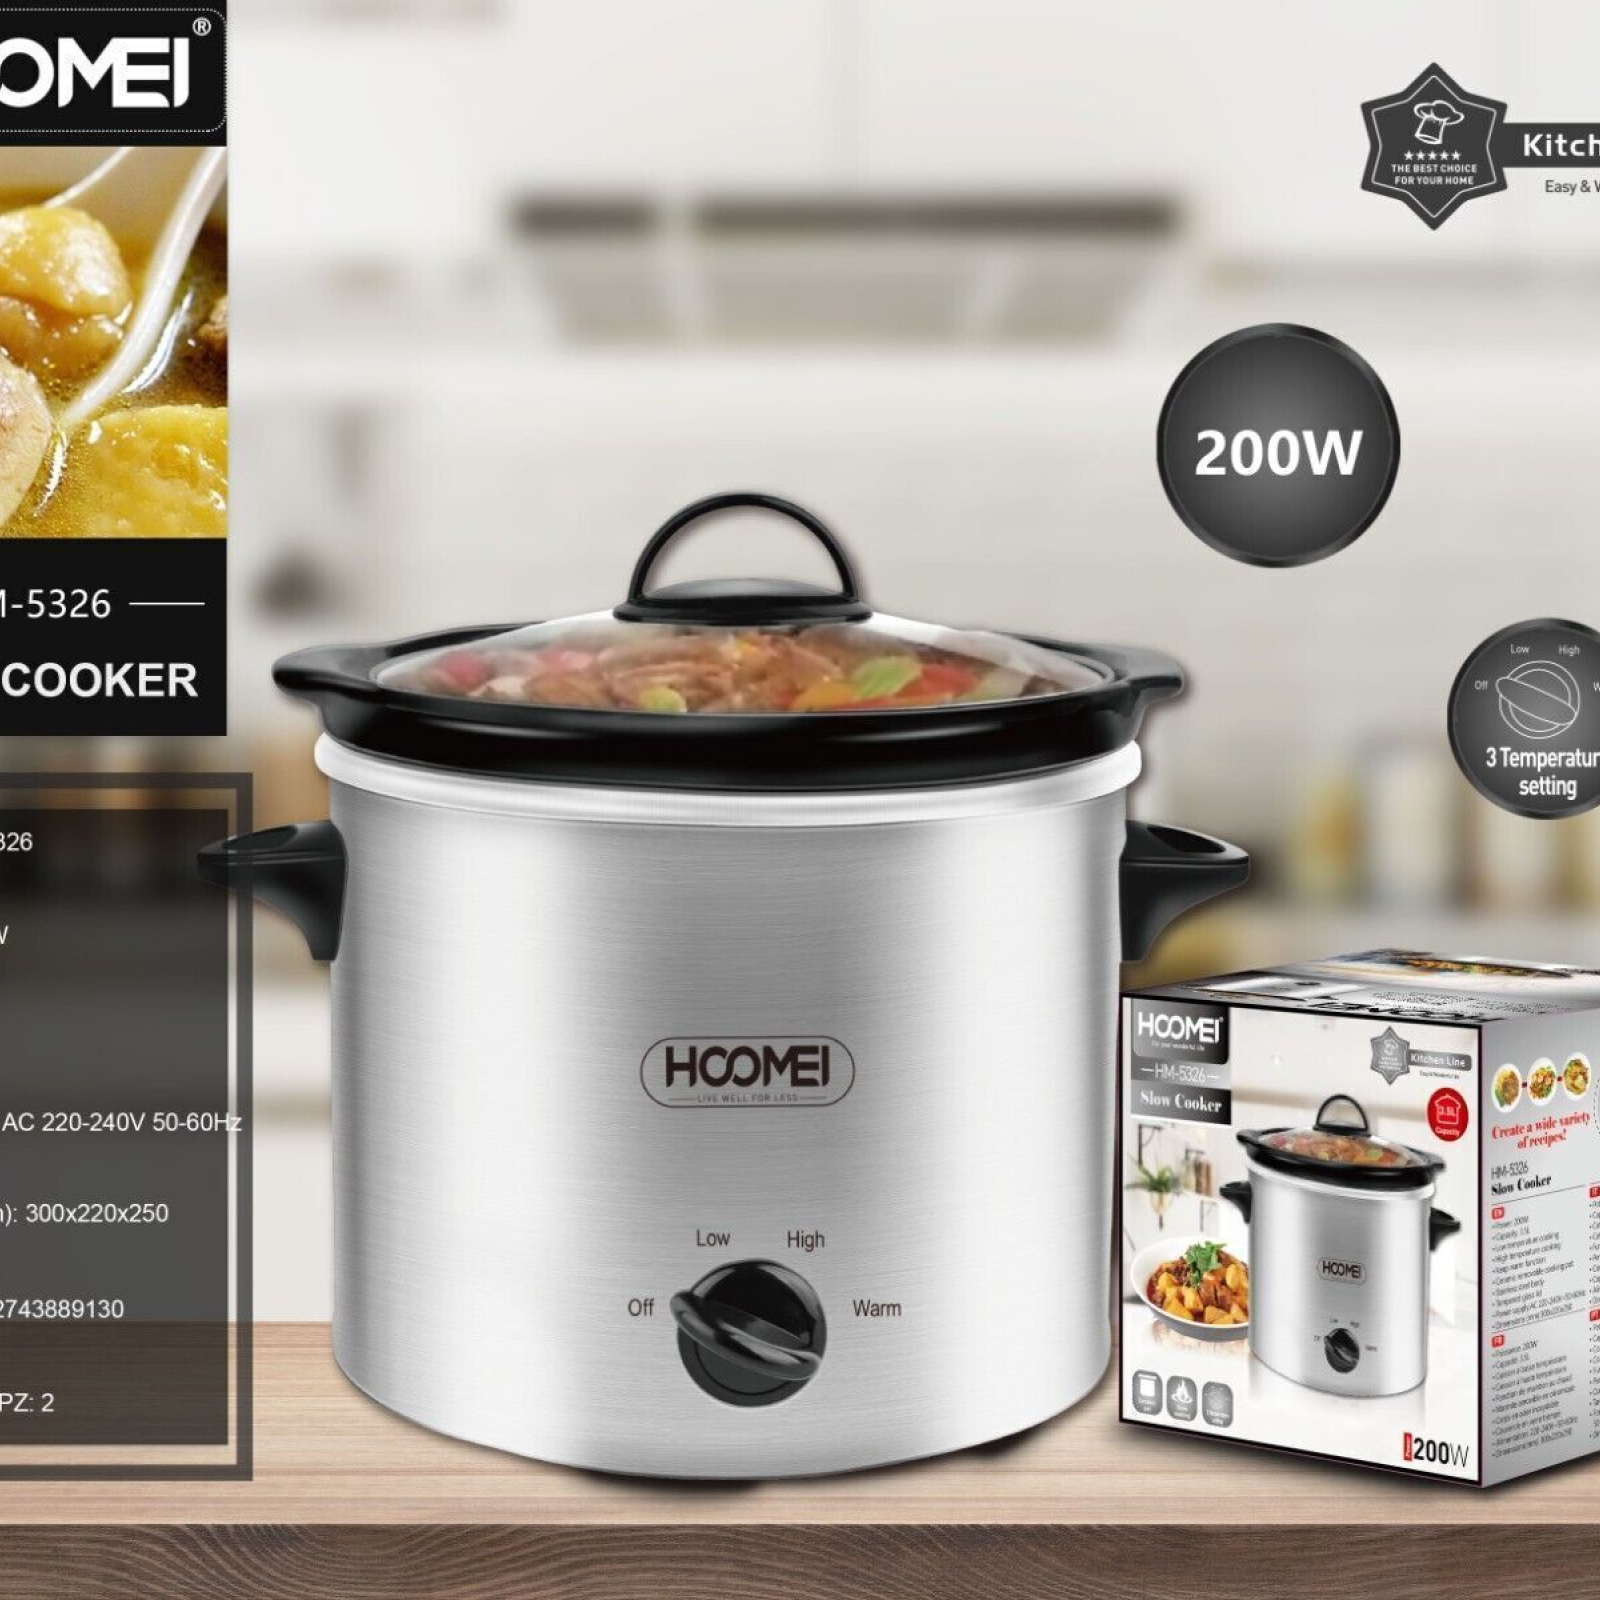 180W, slow cooker, electric cooker, steam cooker, electric pot, 3.5LT capacity, Hoomei HM-5326